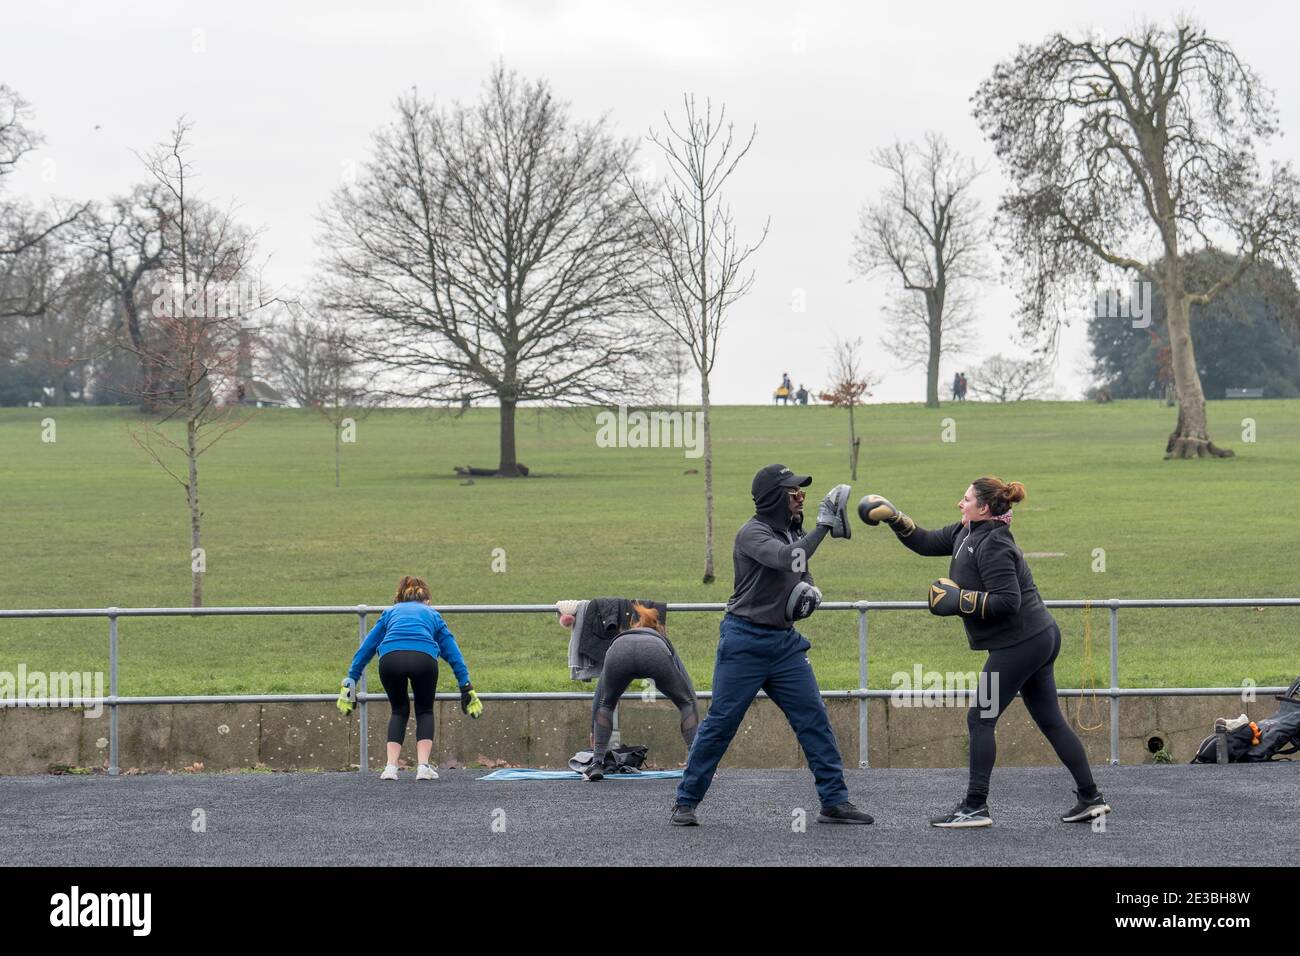 A man and woman boxing training and woman keep fit in Brockwell Park on the 15th January 2021 in South London, England. Photo by Sam Mellish Stock Photo